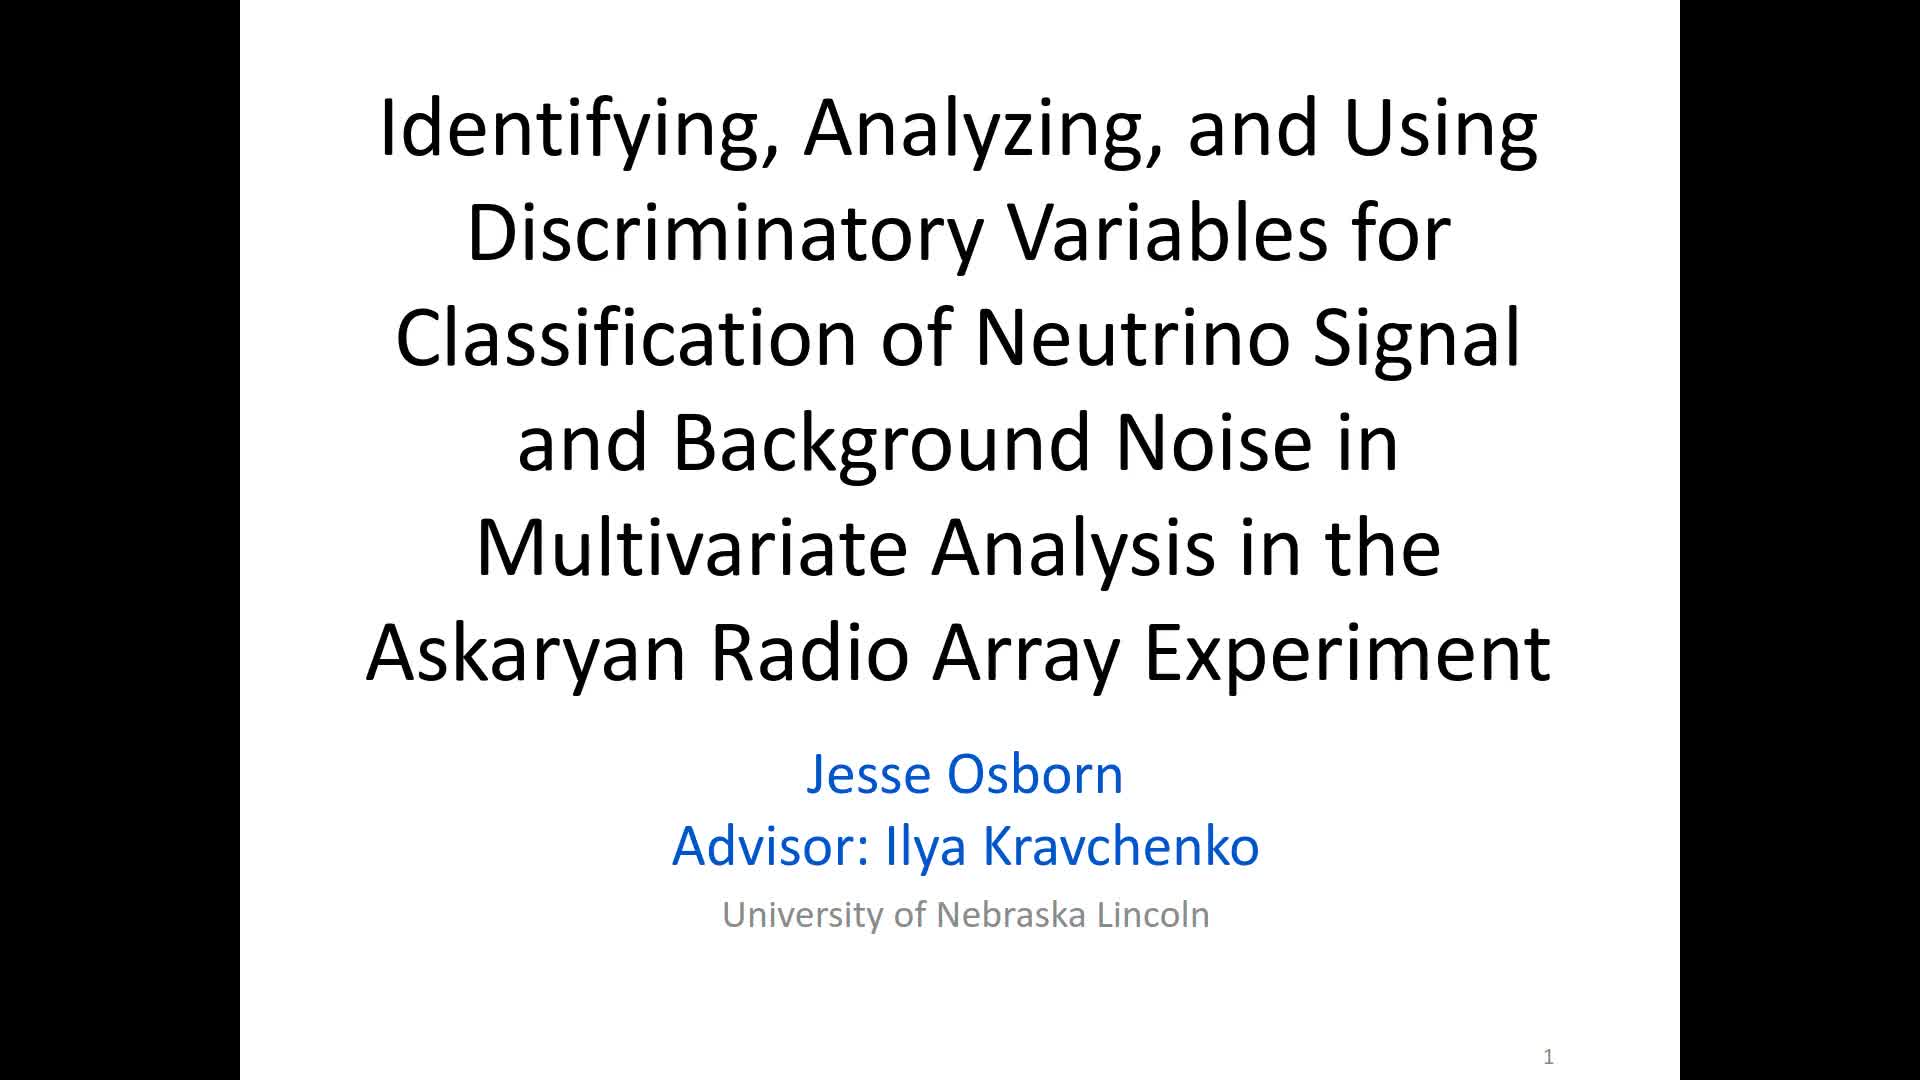 Identifying, Analyzing, and Using Discriminatory Variables for Classification of Neutrino Signal and Background Noise in Multivariate Analysis in the Askaryan Radio Array Experiment